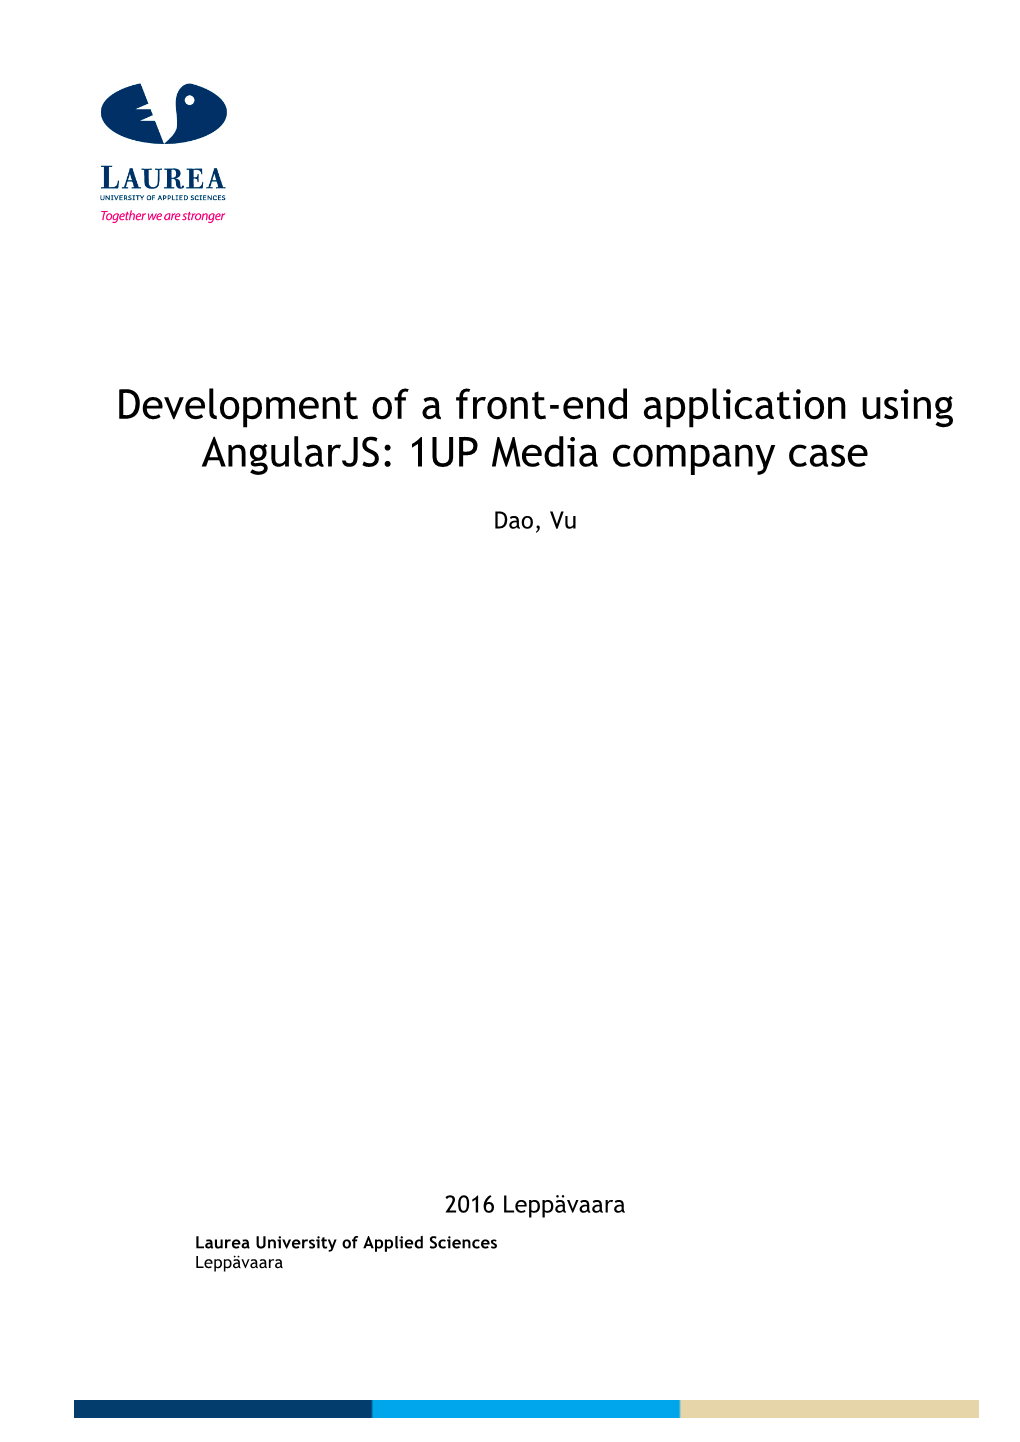 Development of a Front-End Application Using Angularjs: 1UP Media Company Case